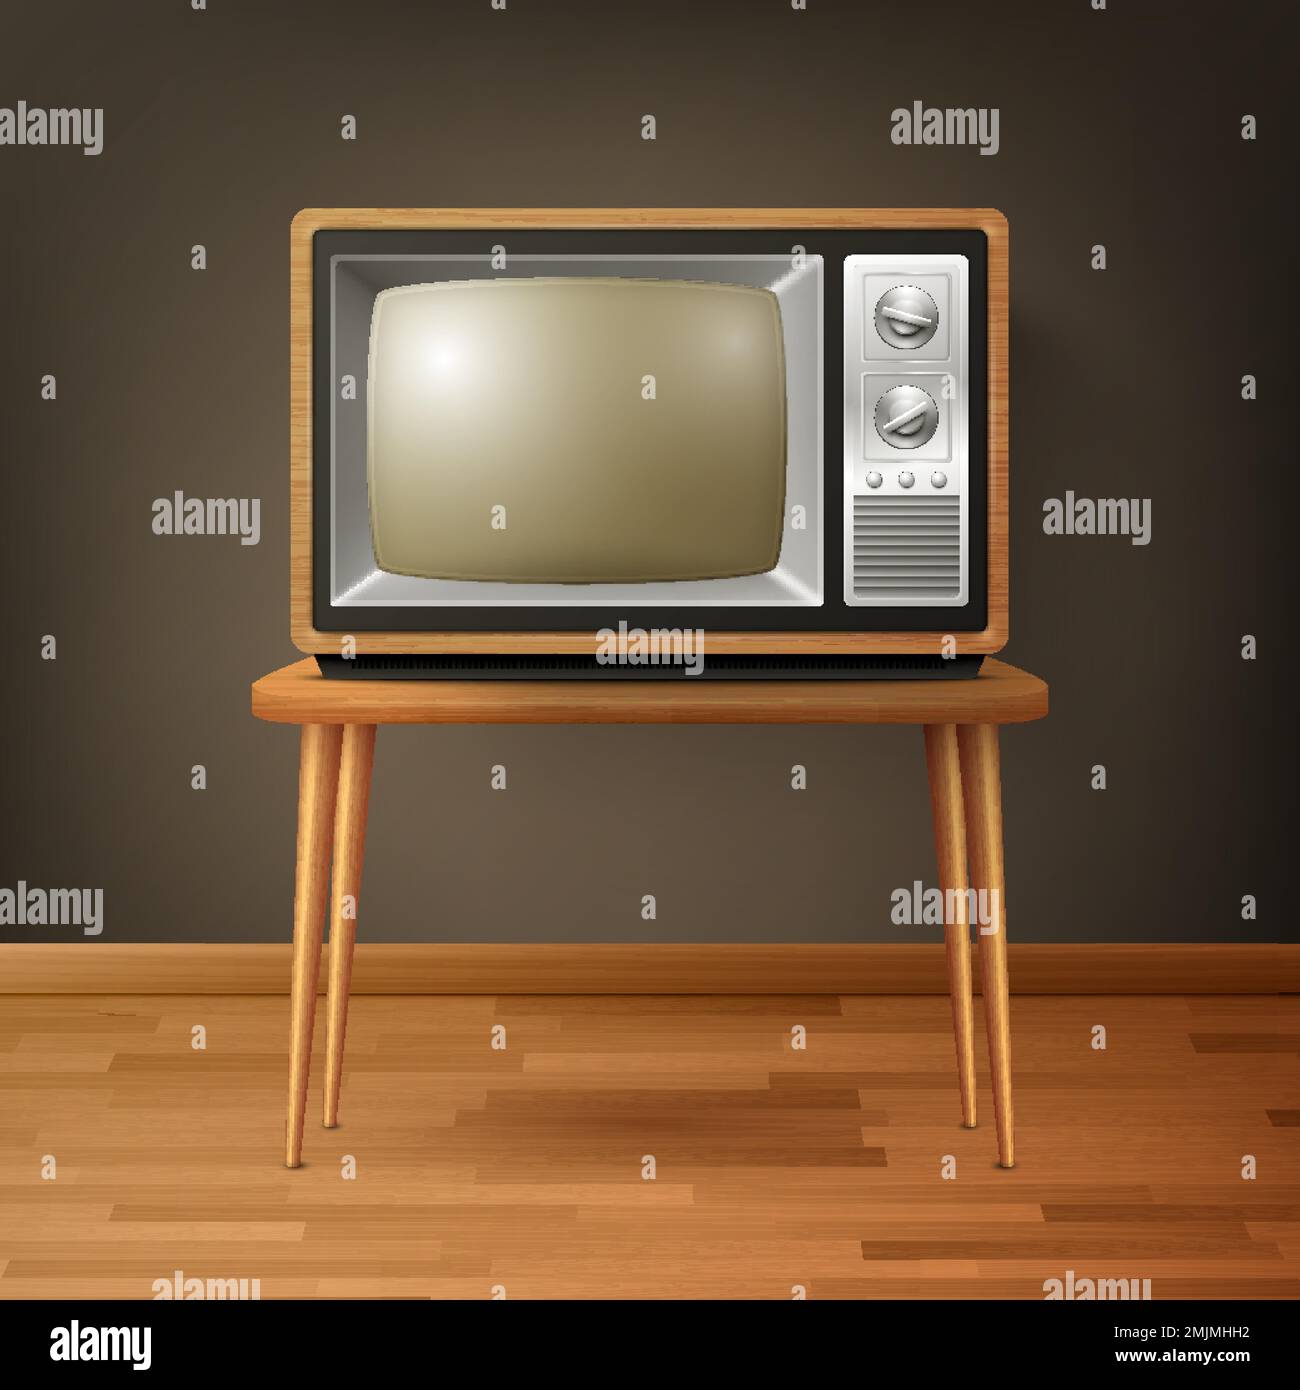 Vector 3d Realistic Brown Wooden Retro TV Receiver on Wooden Table. Home Interior Design Concept. Vintage TV Set, Television, Front View Stock Vector